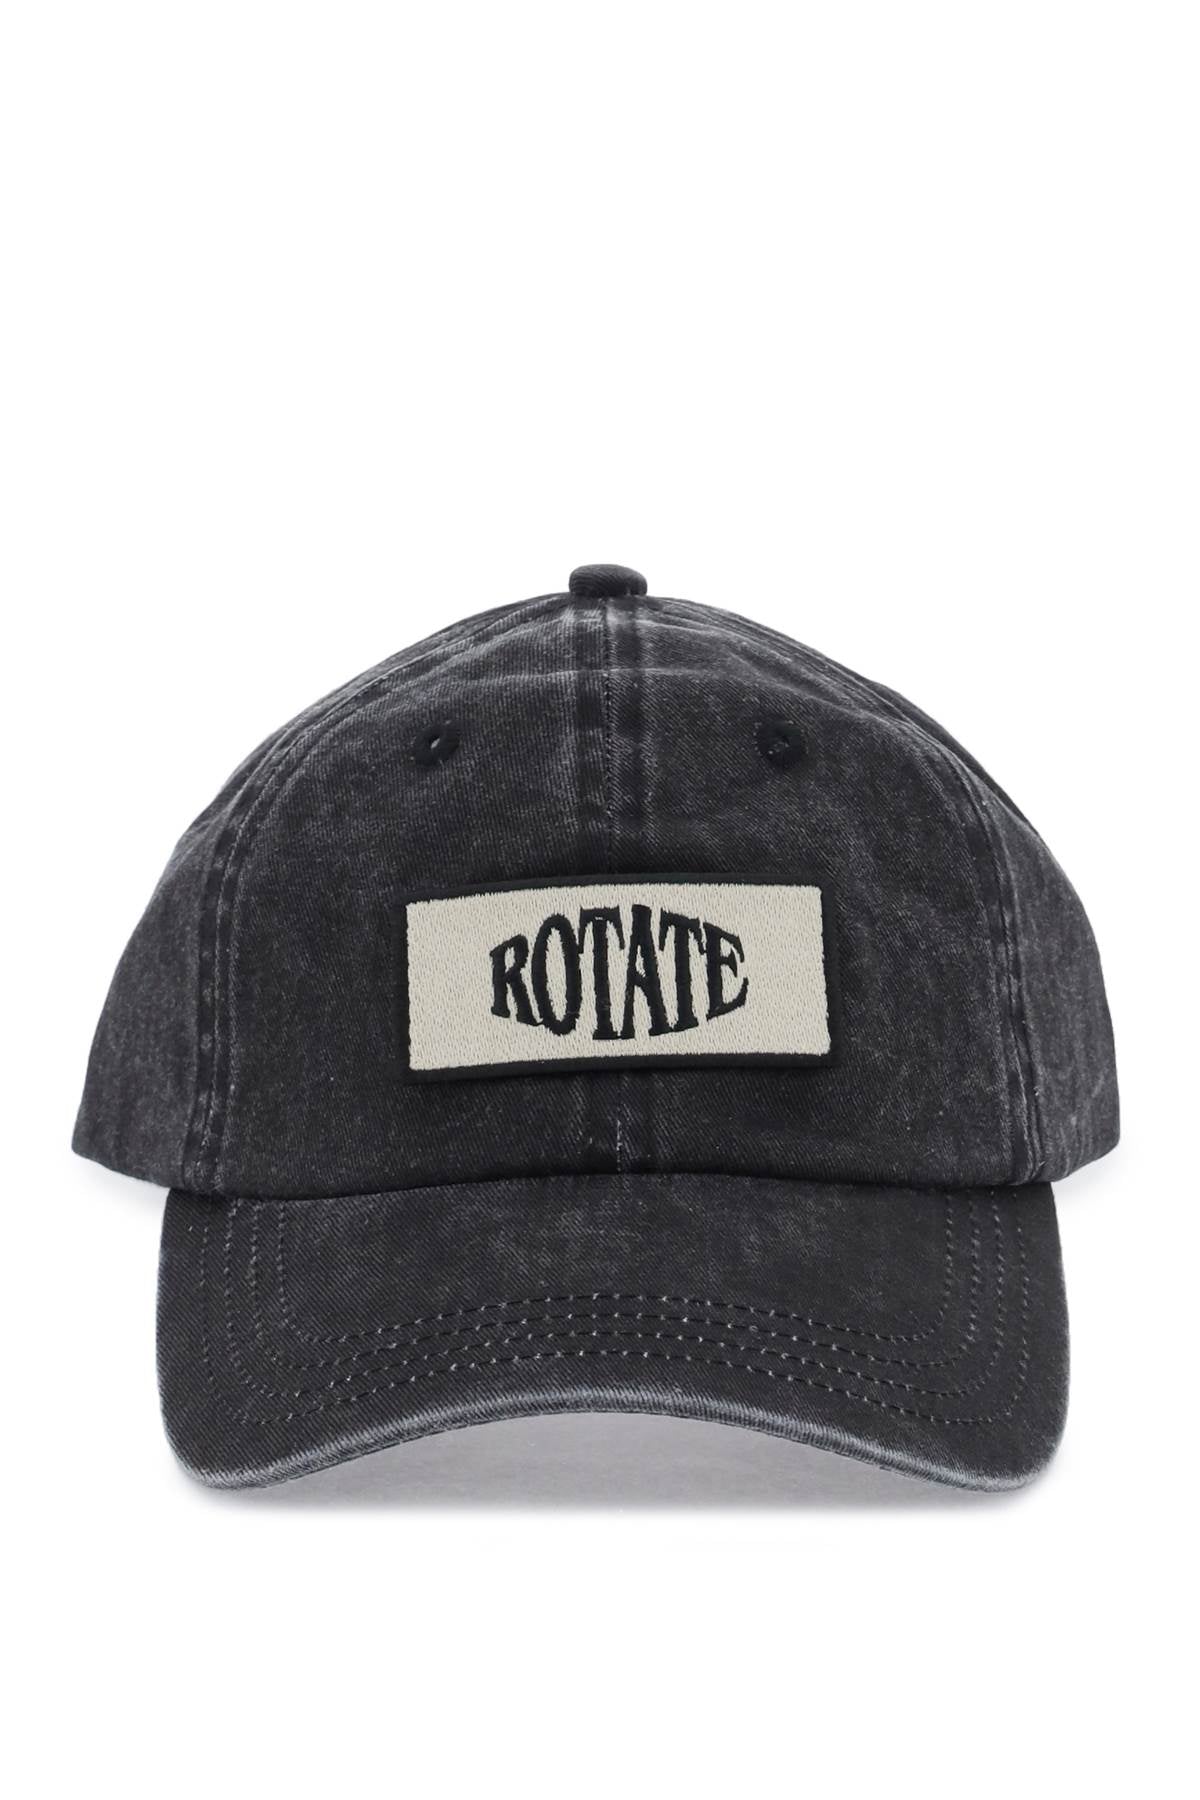 Rotate baseball cap with logo patch-women > accessories > scarves and gloves-Rotate-Urbanheer